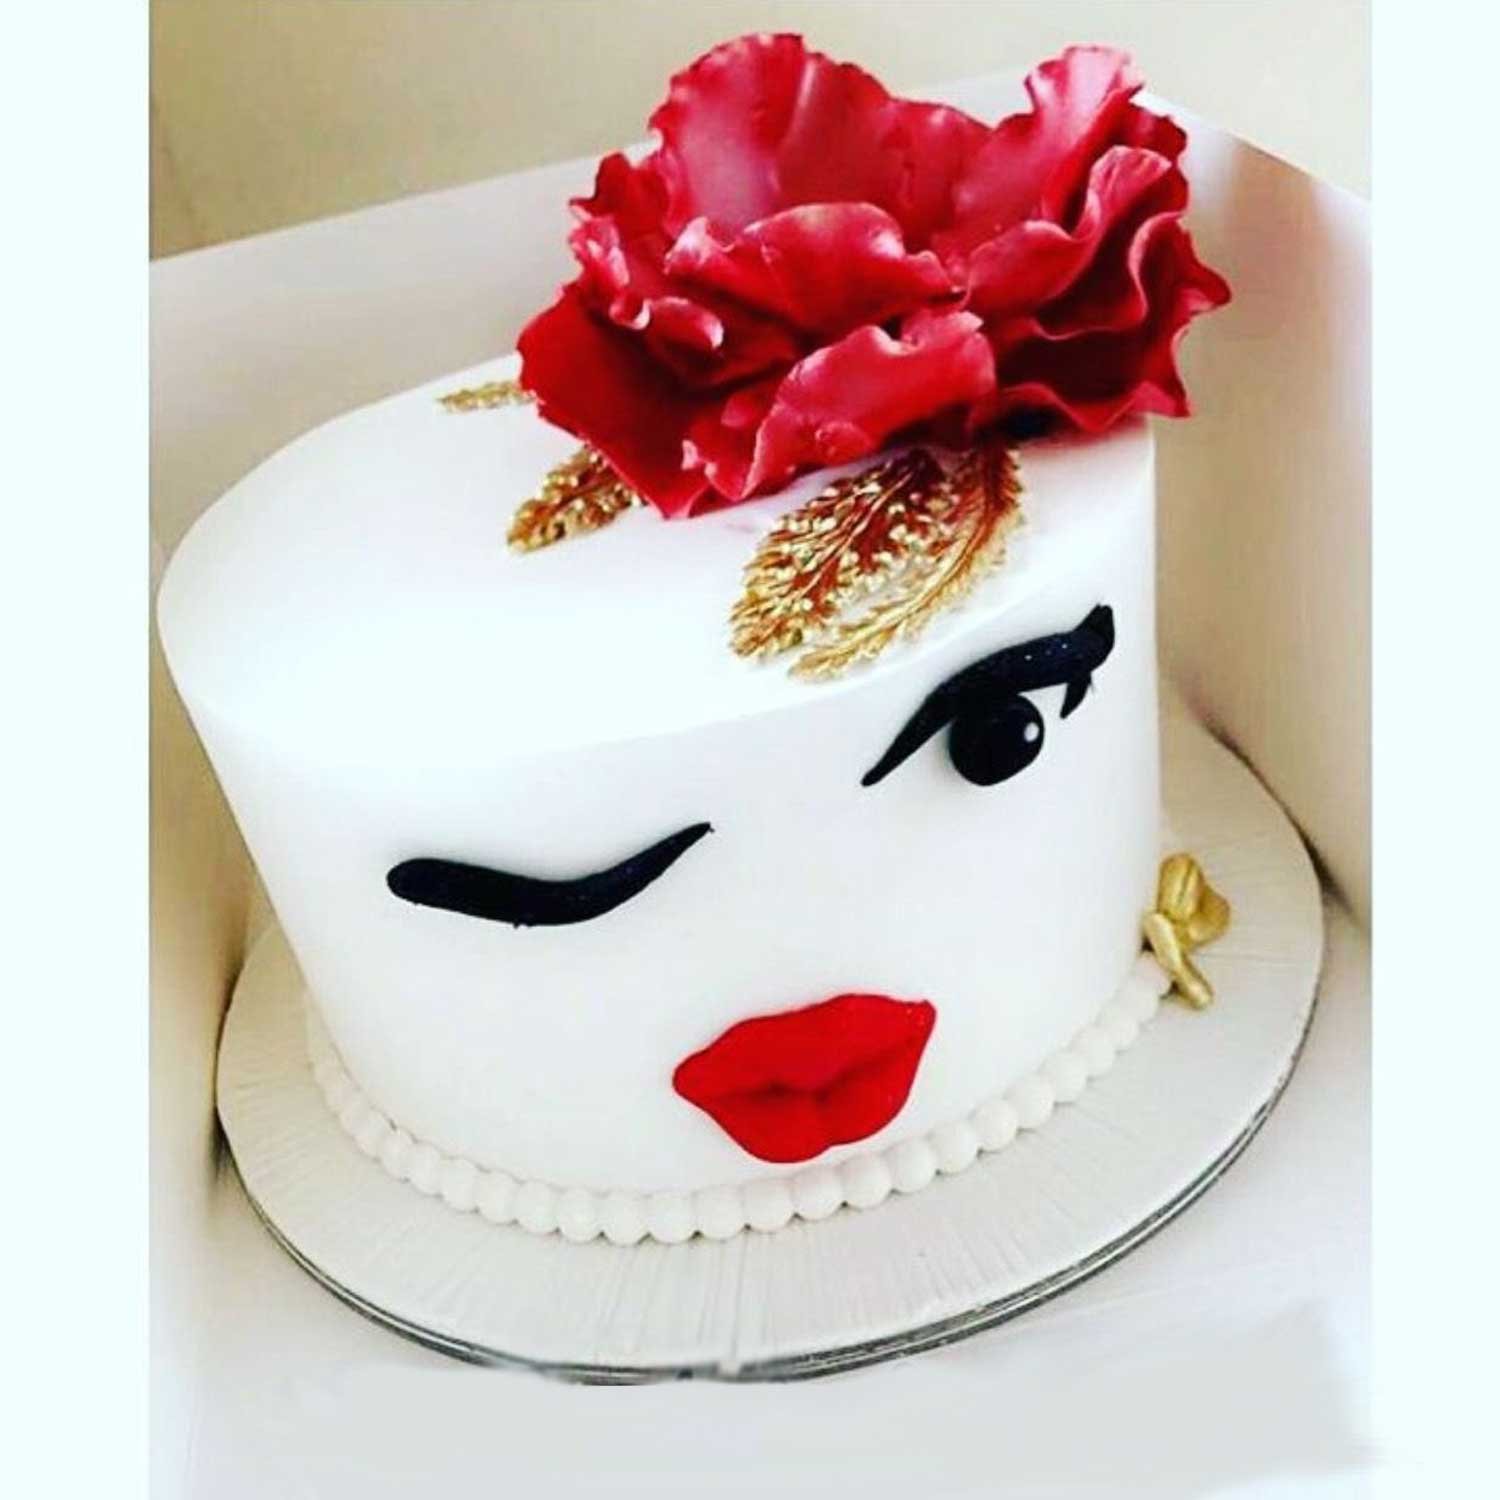 Cakes for Women Online | Cakes For Women's Day | Yummy Cake